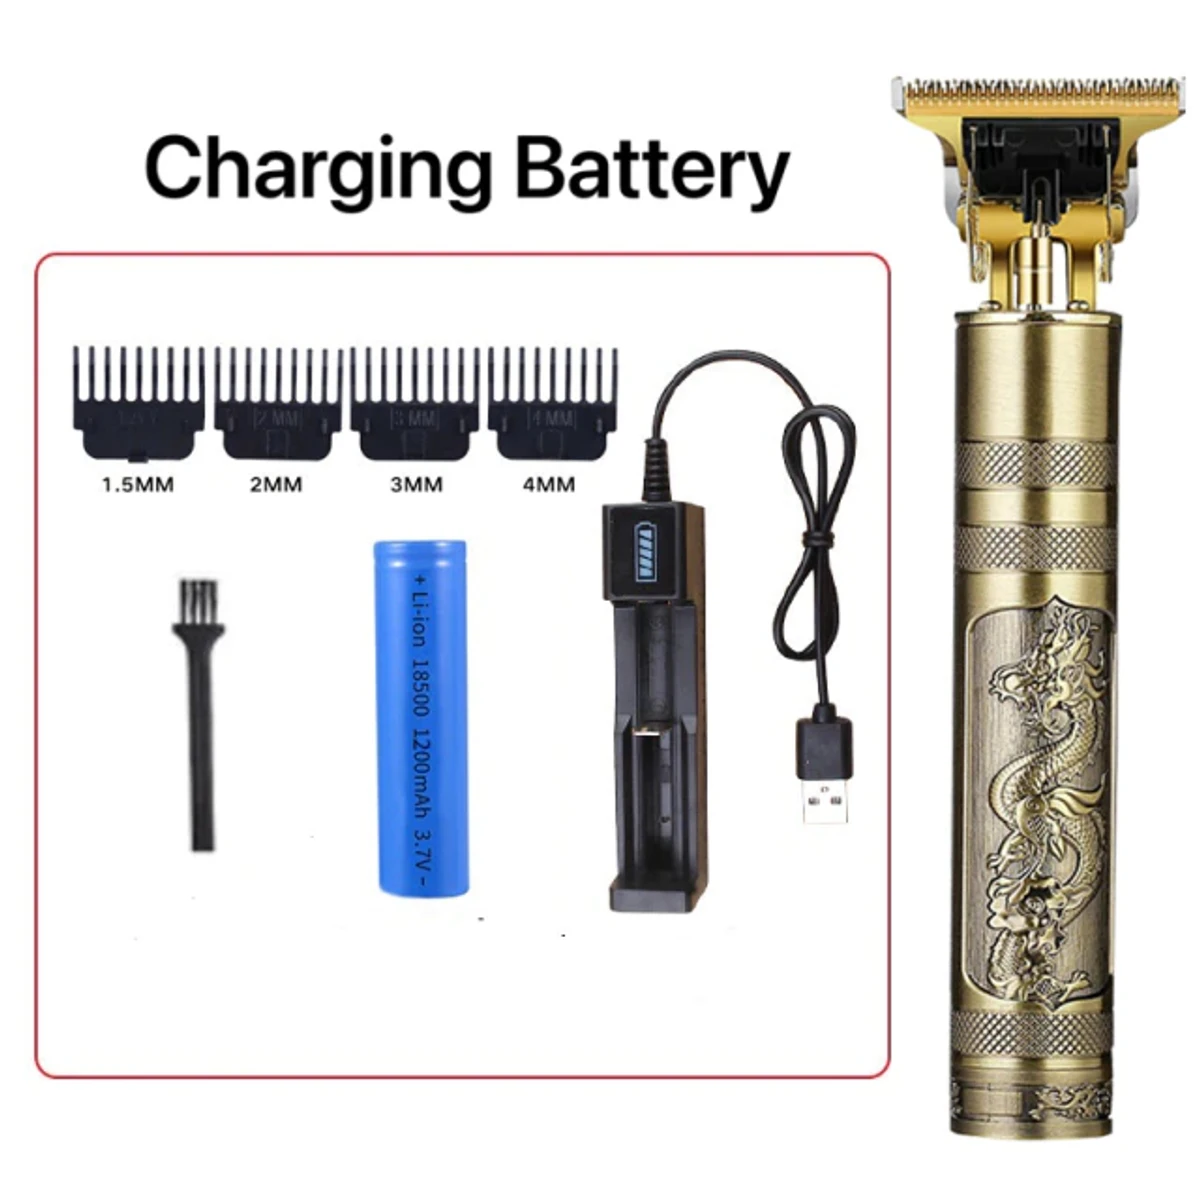 Vintage T9 Bald Head Electric Hair Clipper Recharge Professional Cordless Hair Trimmer for Men Barber Hair Cutting Machine